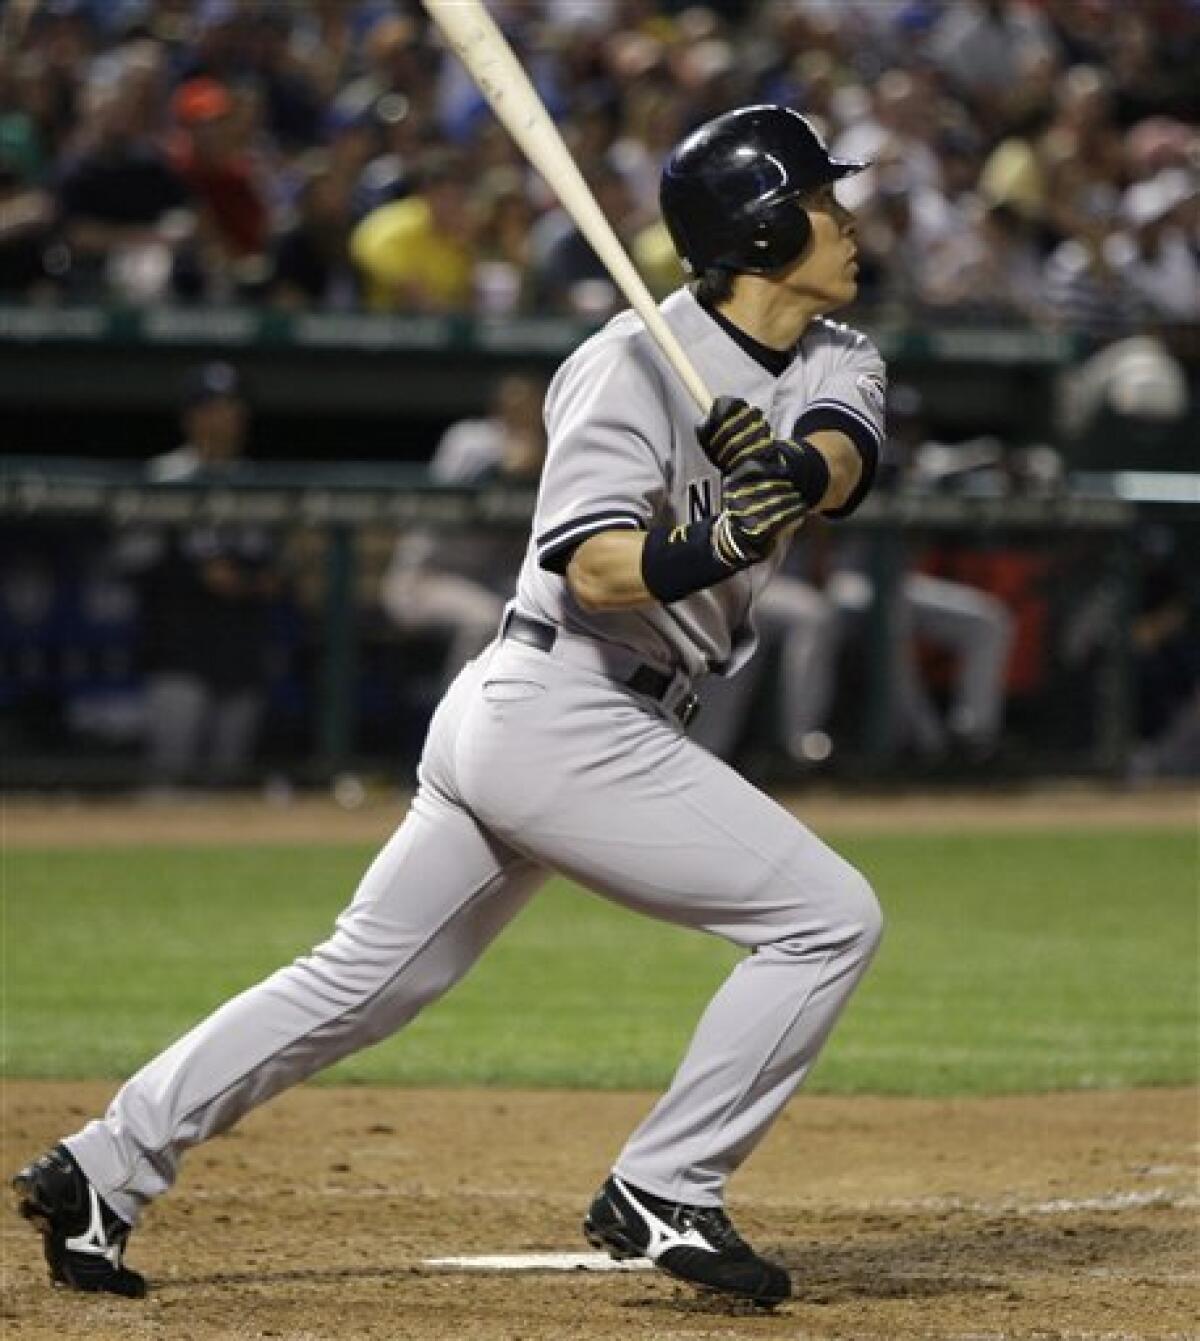 With second-half resurgence, Hideki Matsui making his case to stay